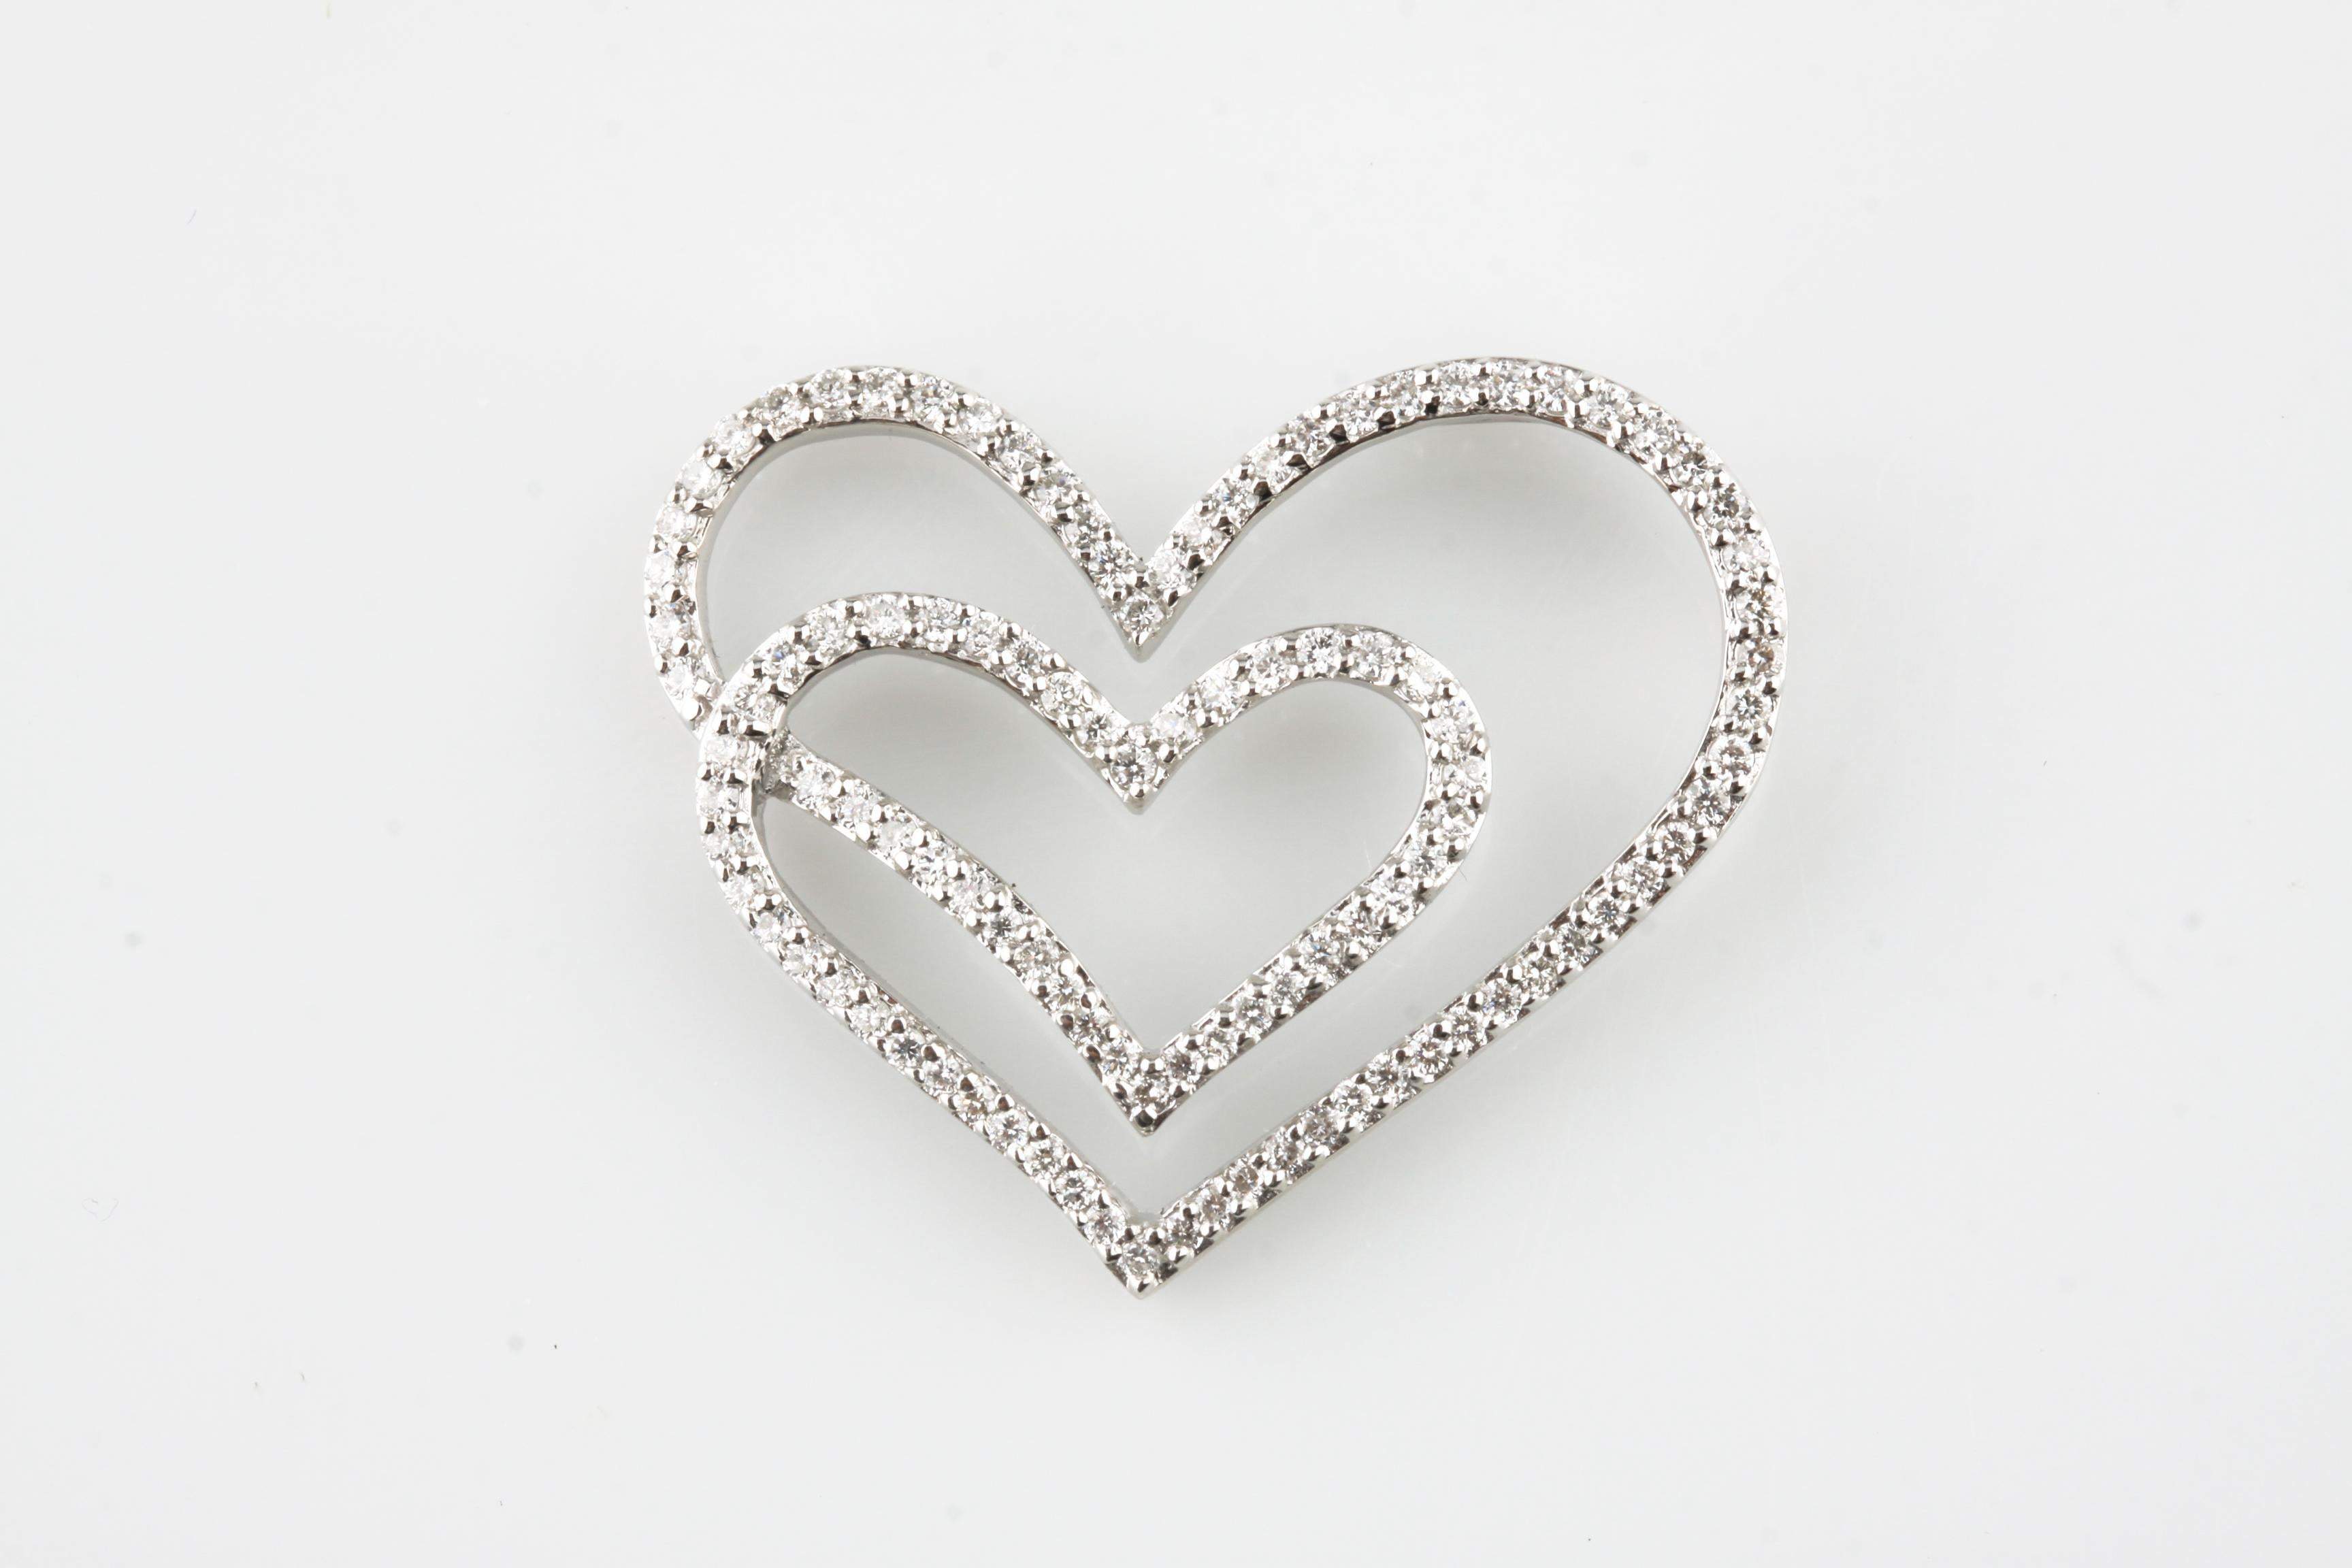 Beautiful Double Heart Pendant
Features Single Pave-Set Row of Round Diamonds in 18k White Gold Outline
Total Diamond Weight = Appx 1 carat
Average Color = G - H
Average Clarity = SI
Width of Pendant = 33 mm
Height of Pendant = 27 mm
Total Mass =